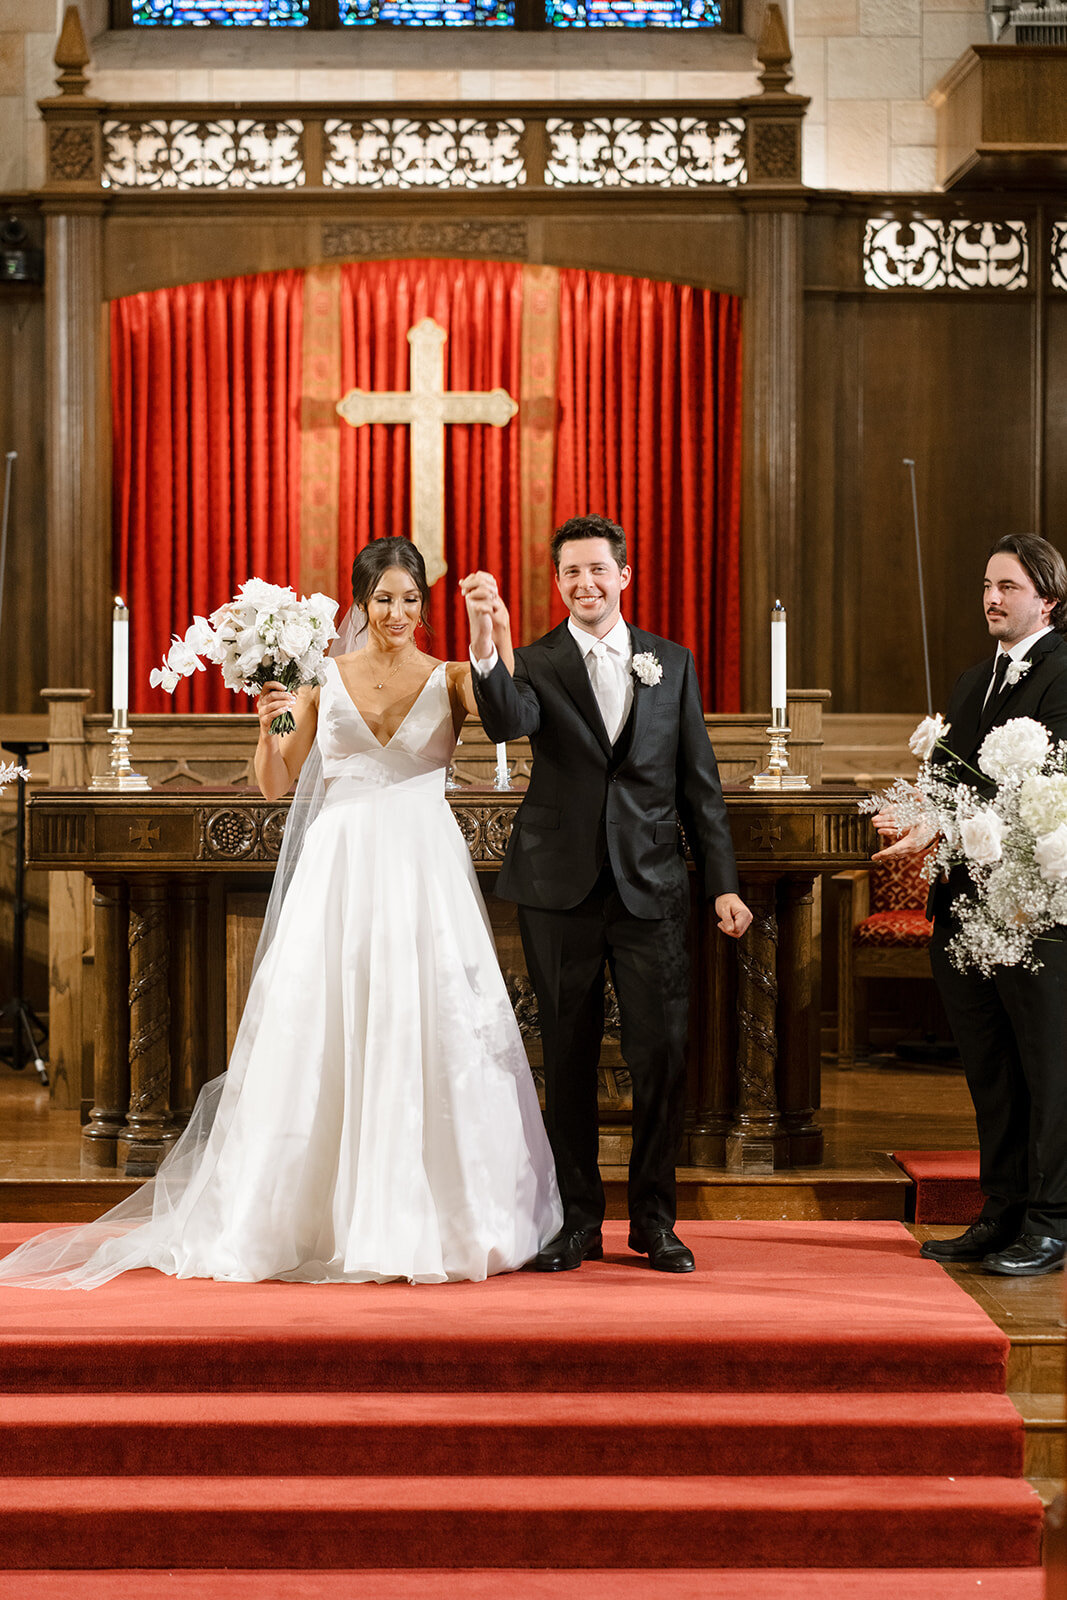 Kylie and Jack at The Grand Hall - Kansas City Wedding Photograpy - Nick and Lexie Photo Film-686